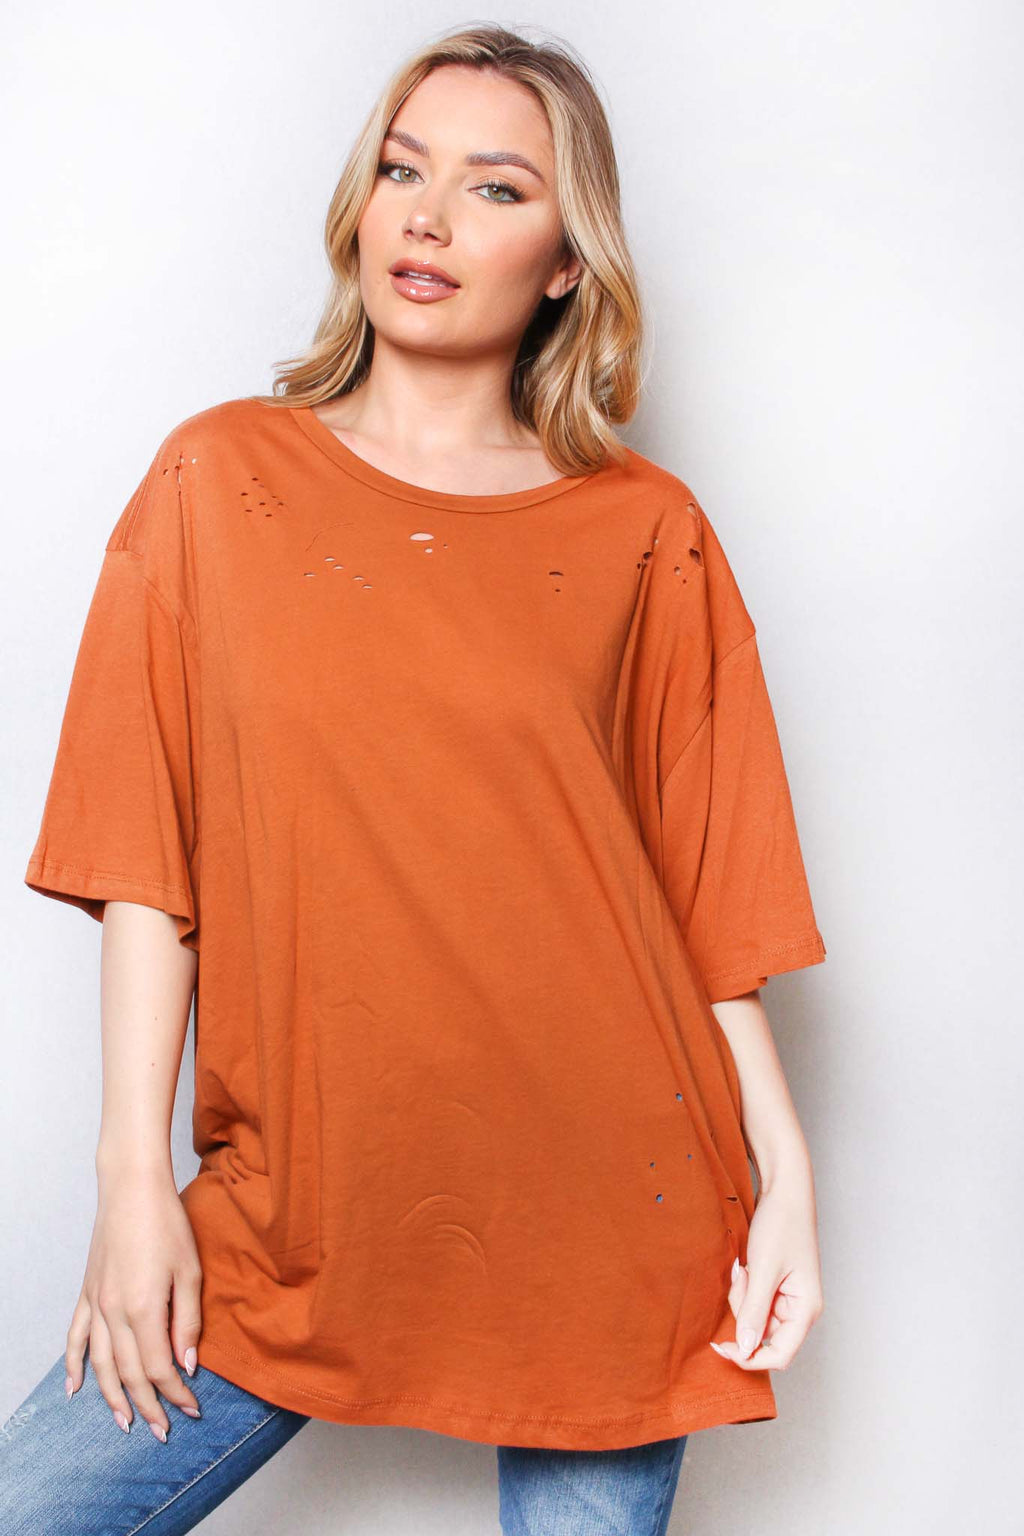 Women's Elbow Sleeve Round Neck Solid Top with Holes